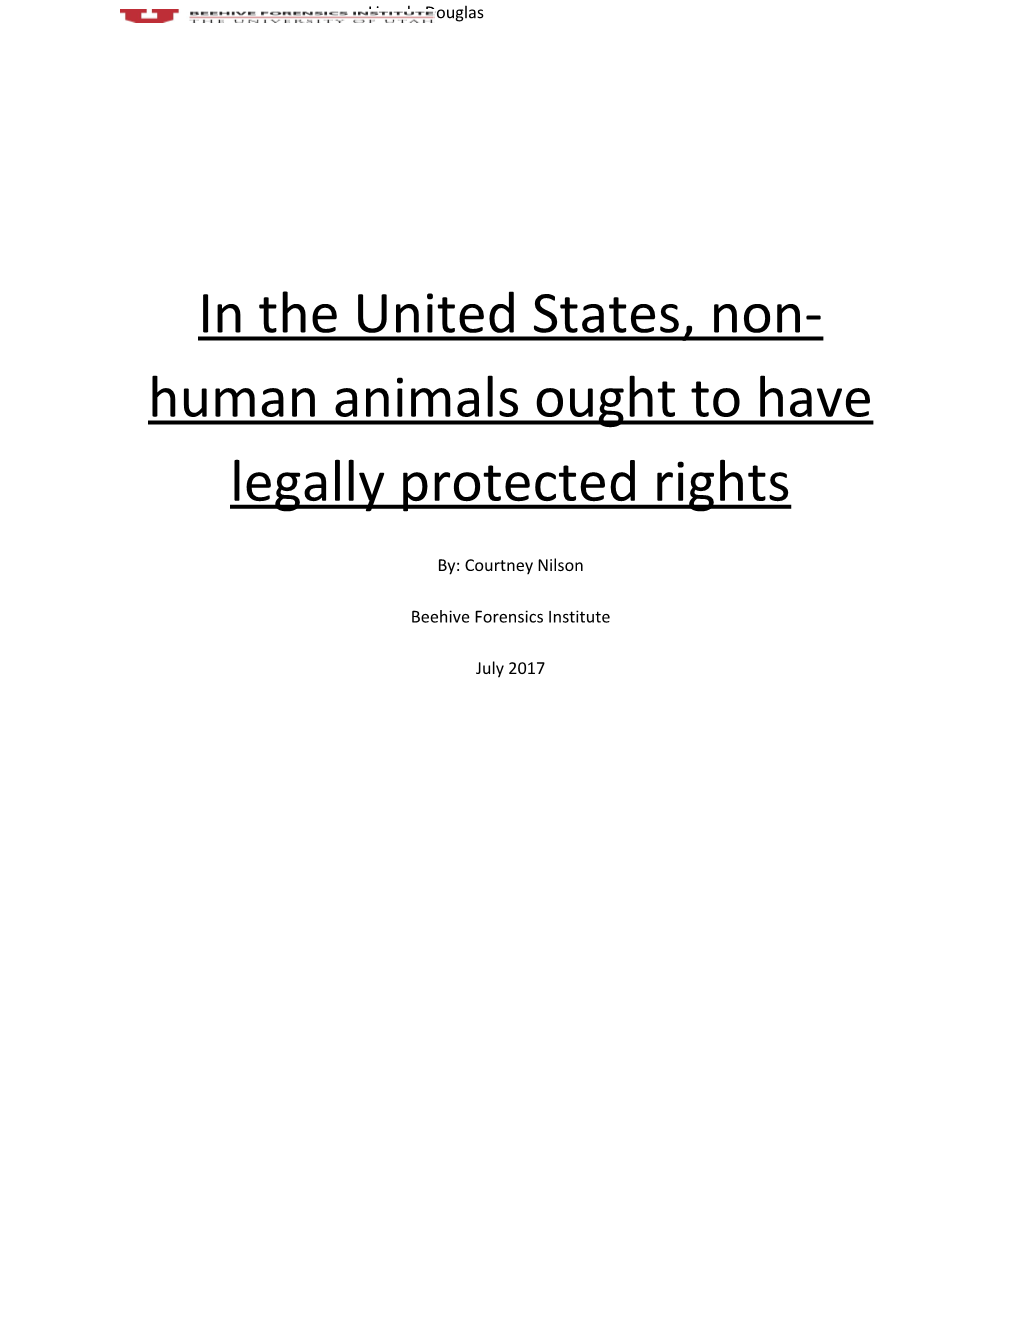 In the United States, Non-Human Animals Ought to Have Legally Protected Rights